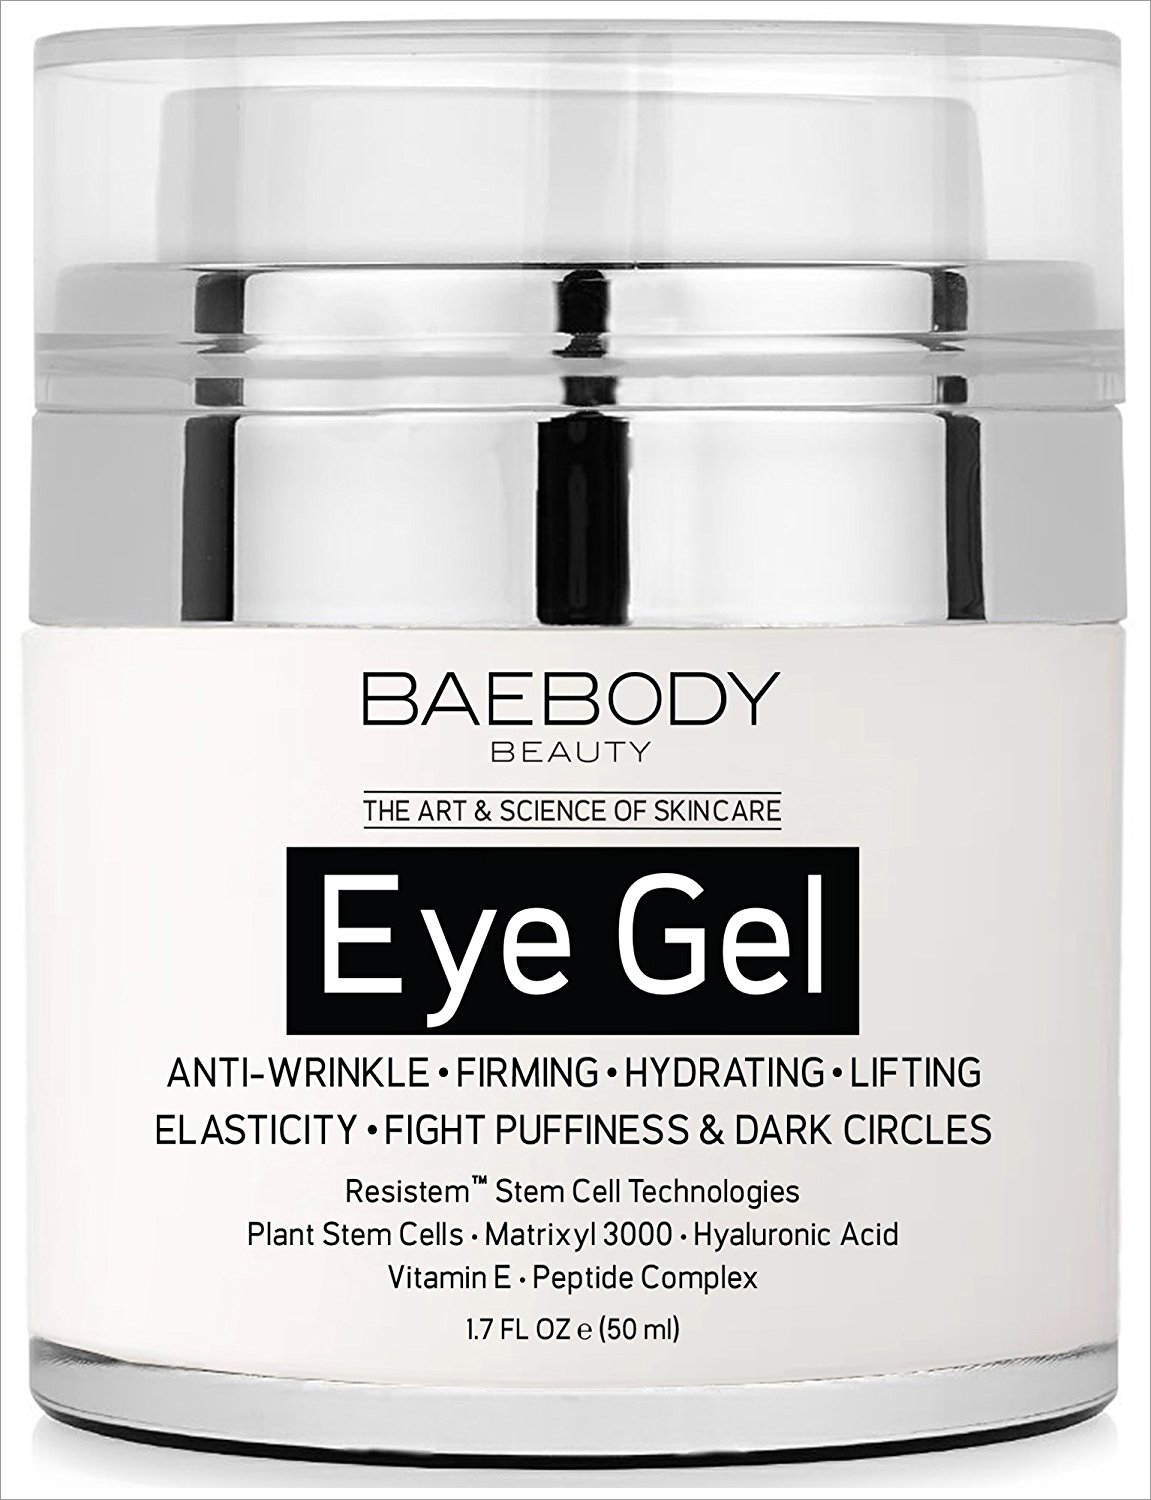 BAEBODY Beauty Eye Gel - Amazon's #1 Best Seller in the skin care category. Works as an anti-aging eye gel to reduce puffiness and dark circles using hyaluronic acid